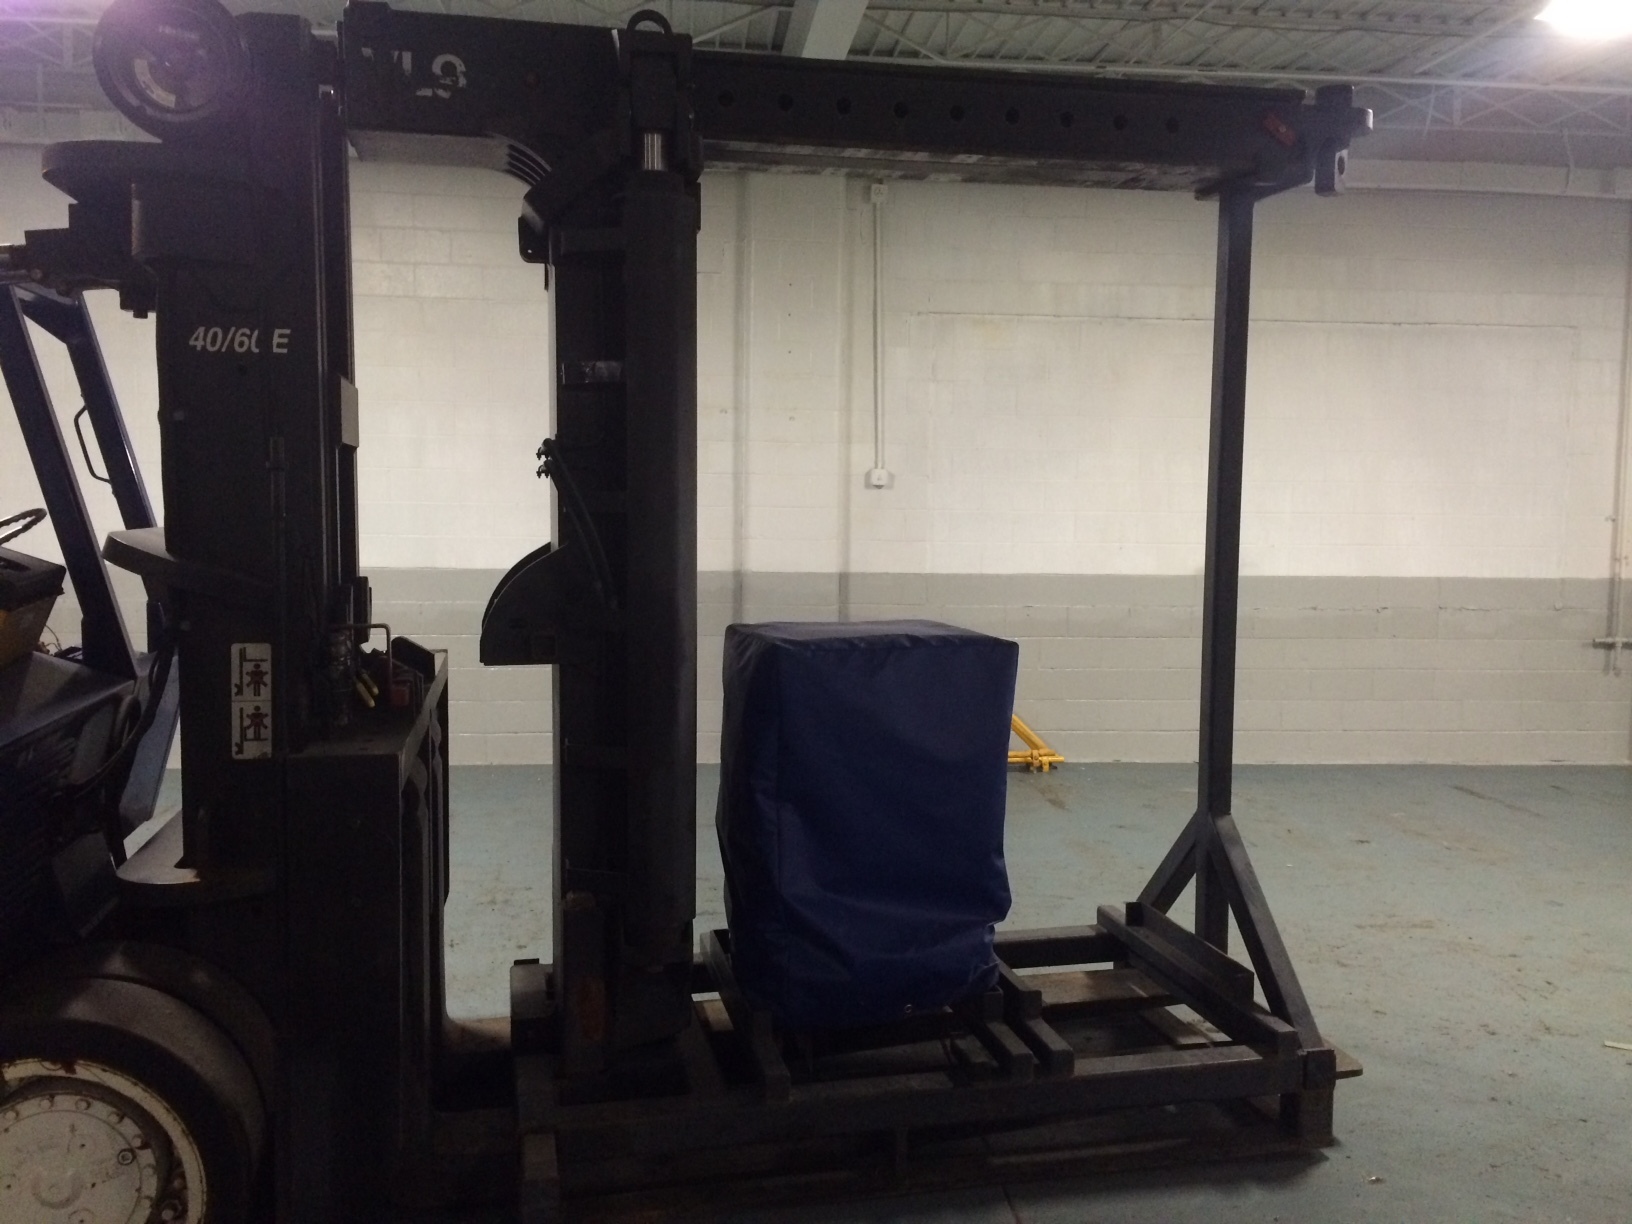 40,000lb. to 60,000lb. Capacity Electric Versa Lift For Sale